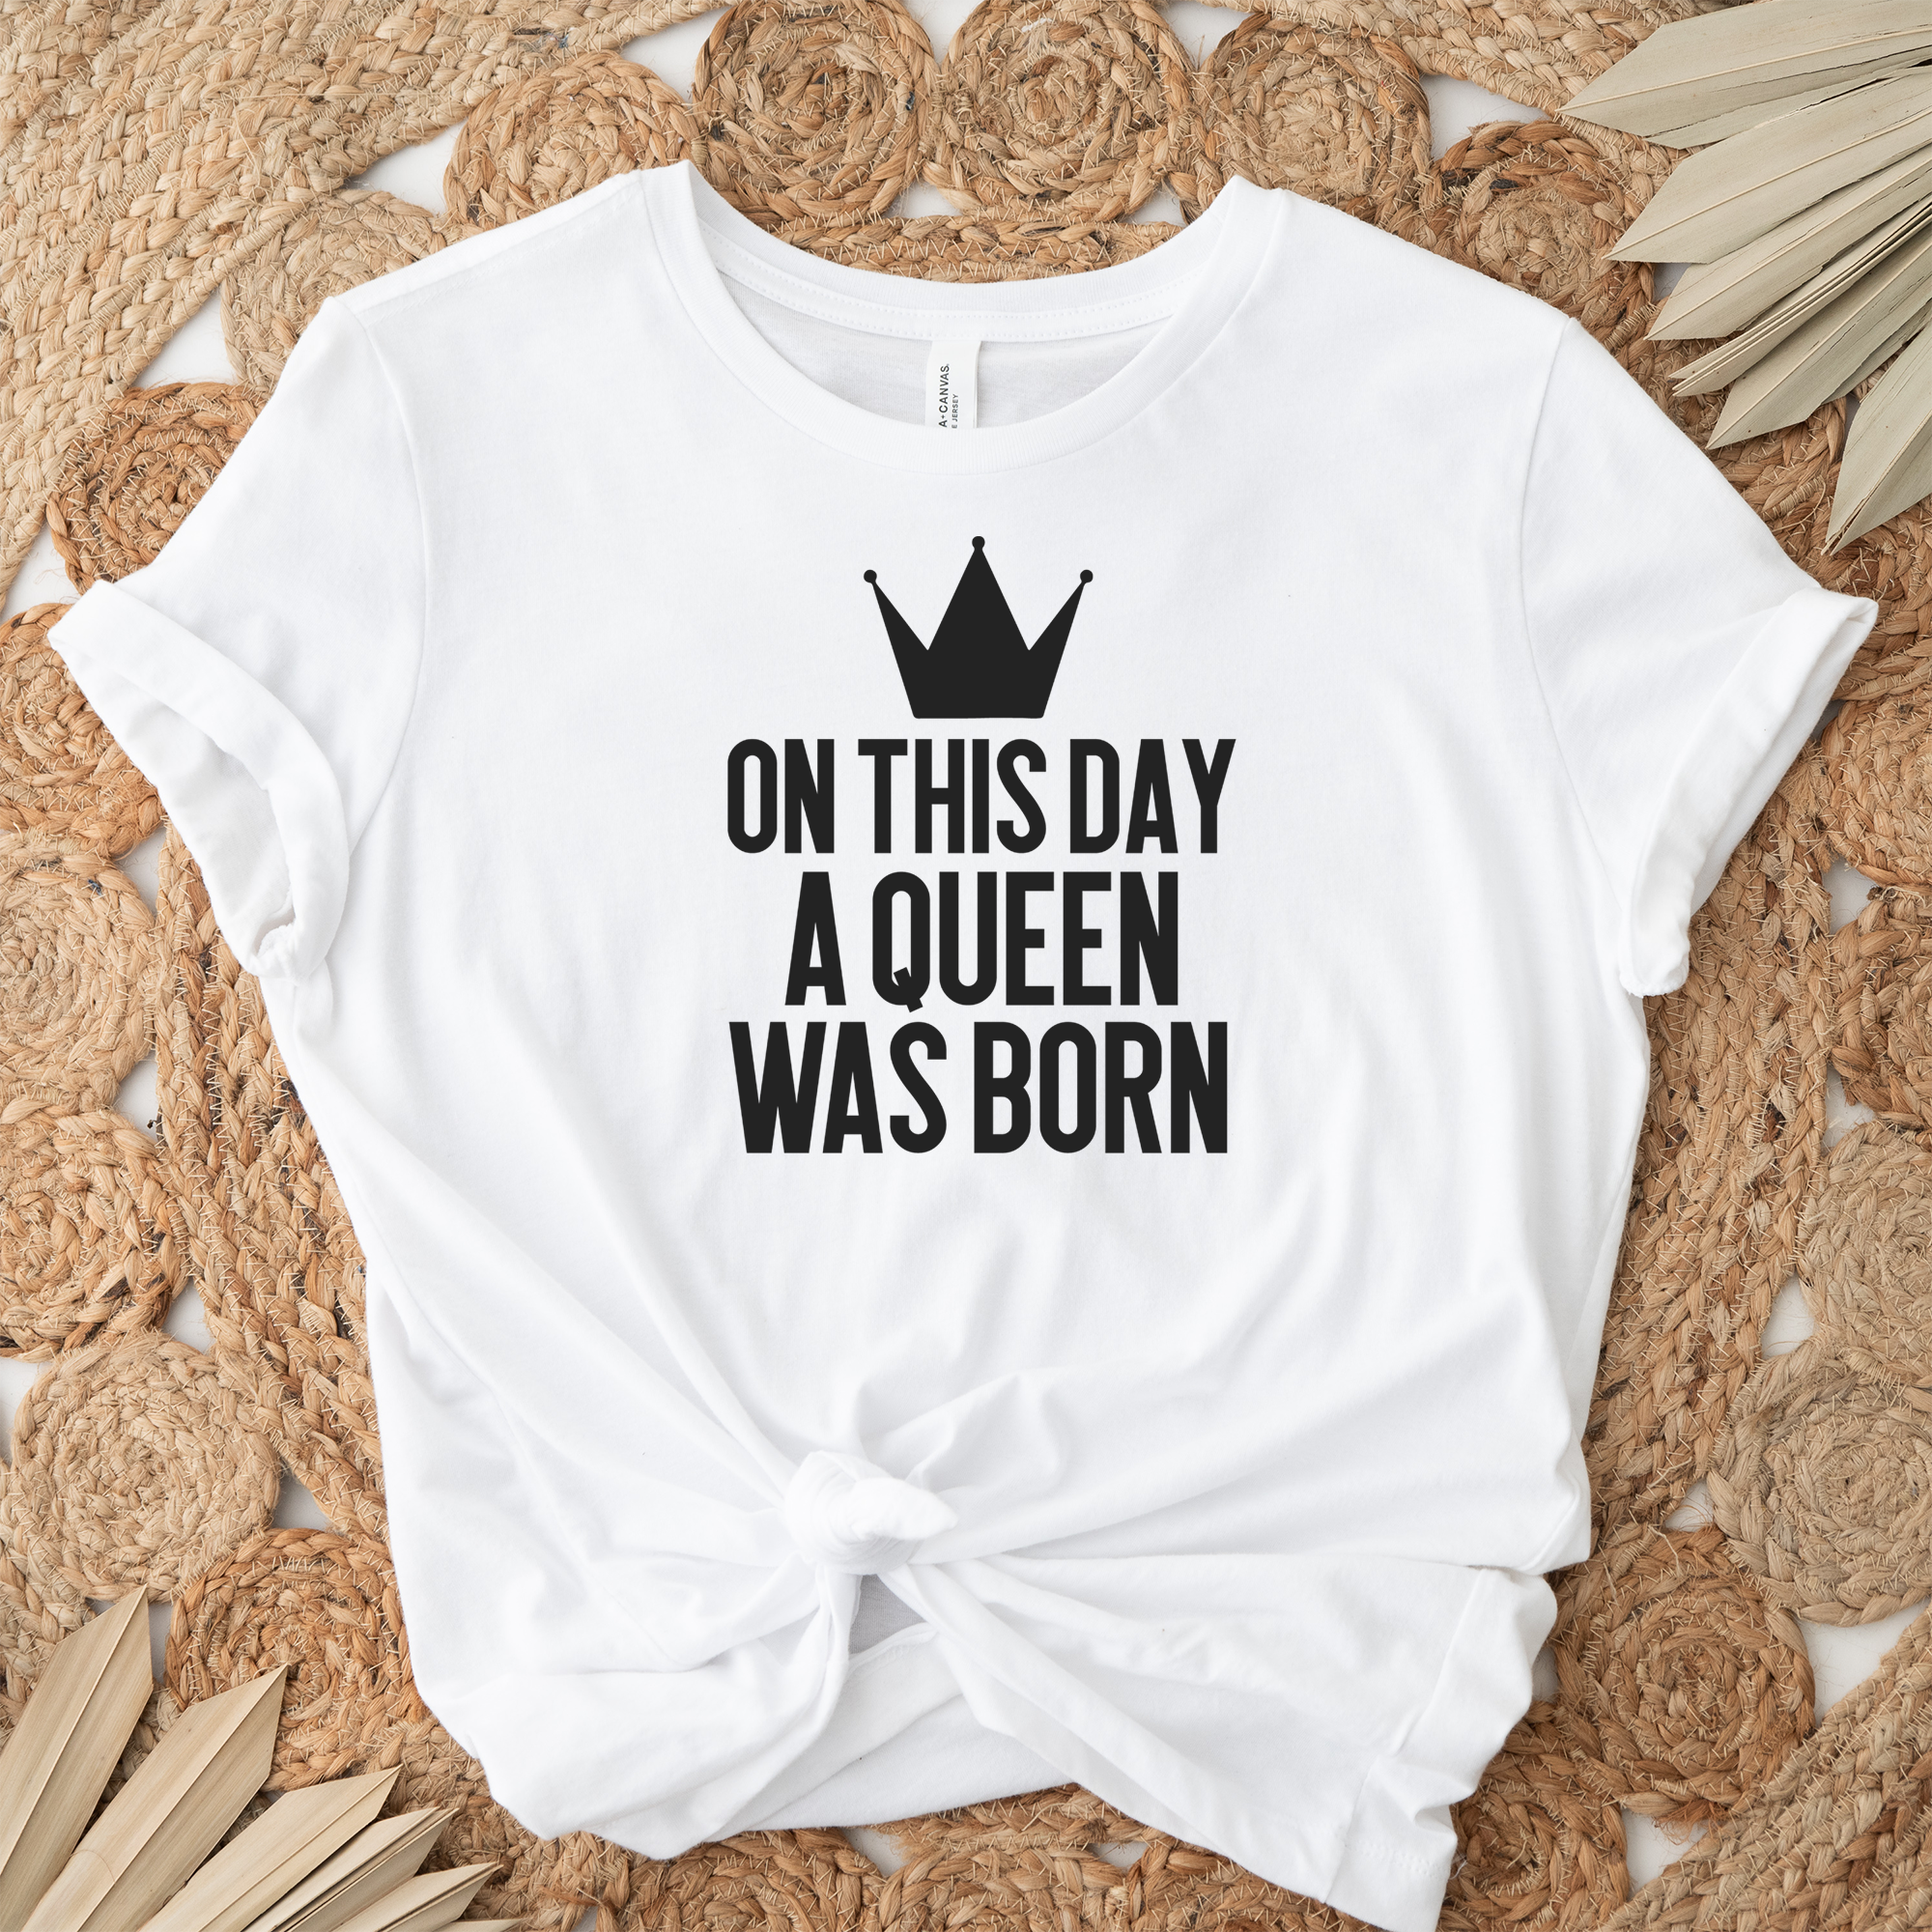 Womens White T Shirt with A-Queen-Was-Born design